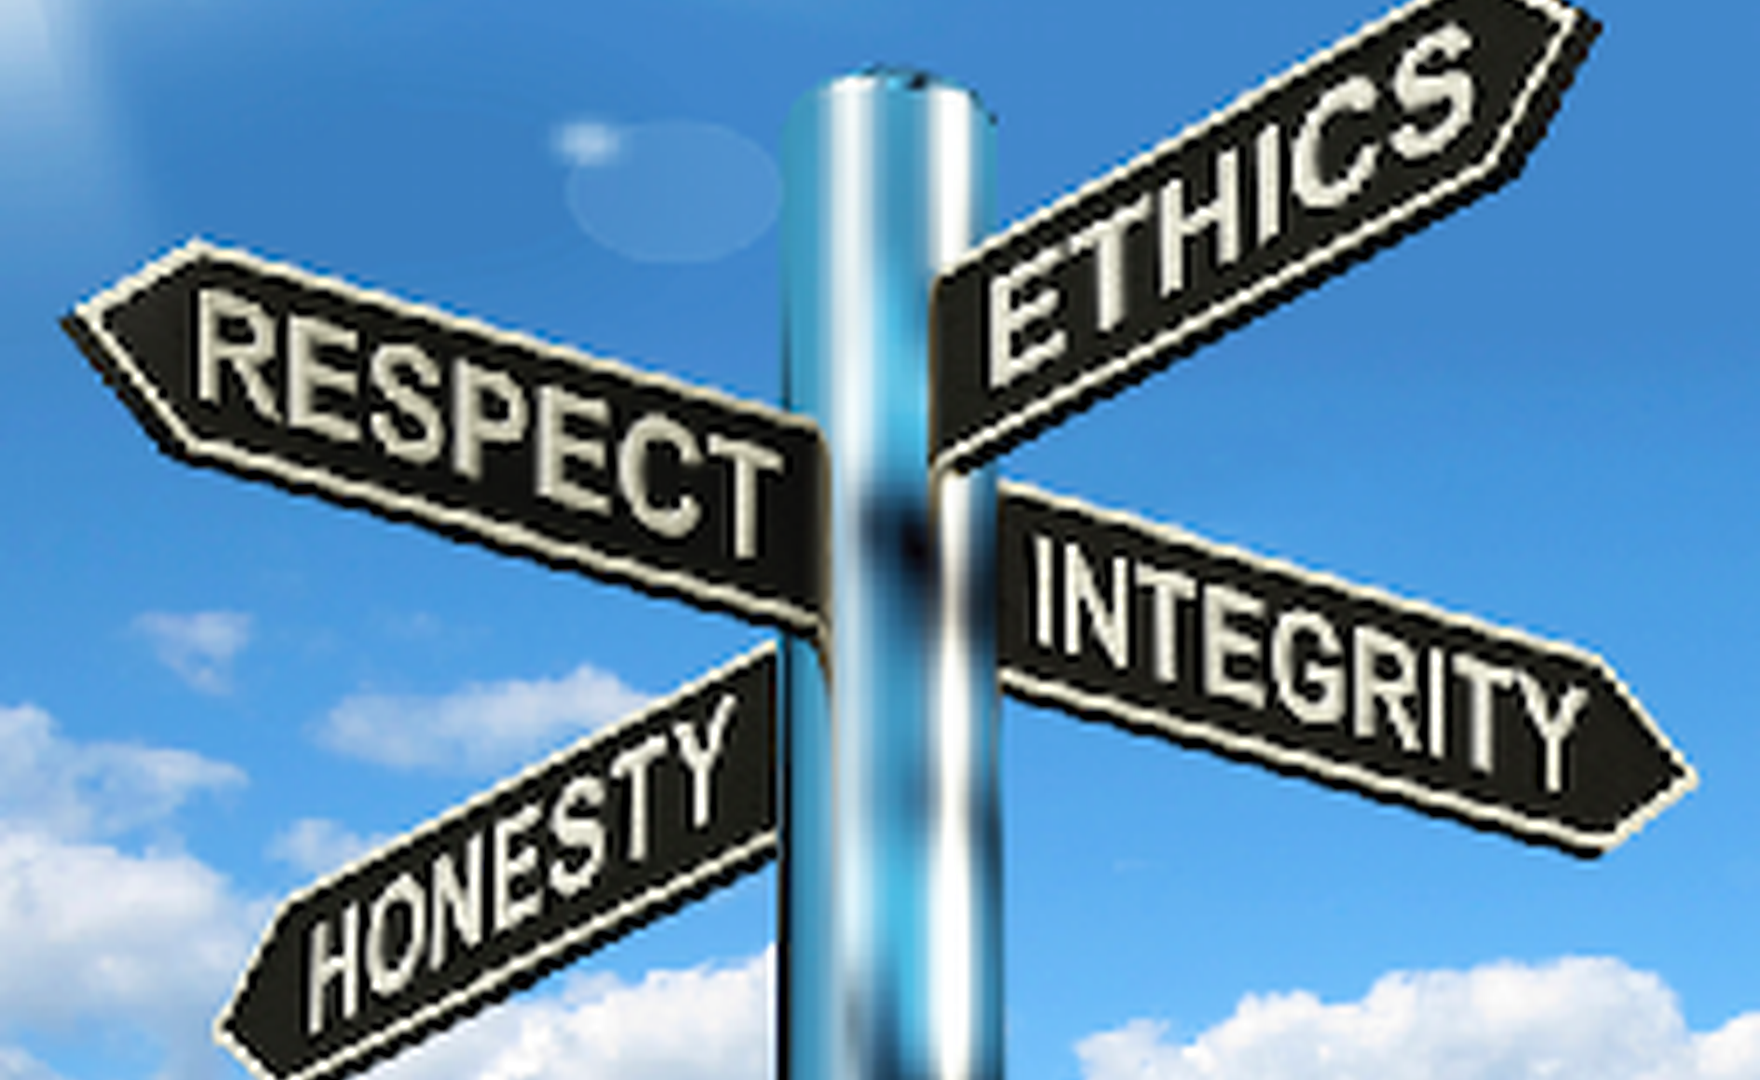 Can you afford to lead without integrity?